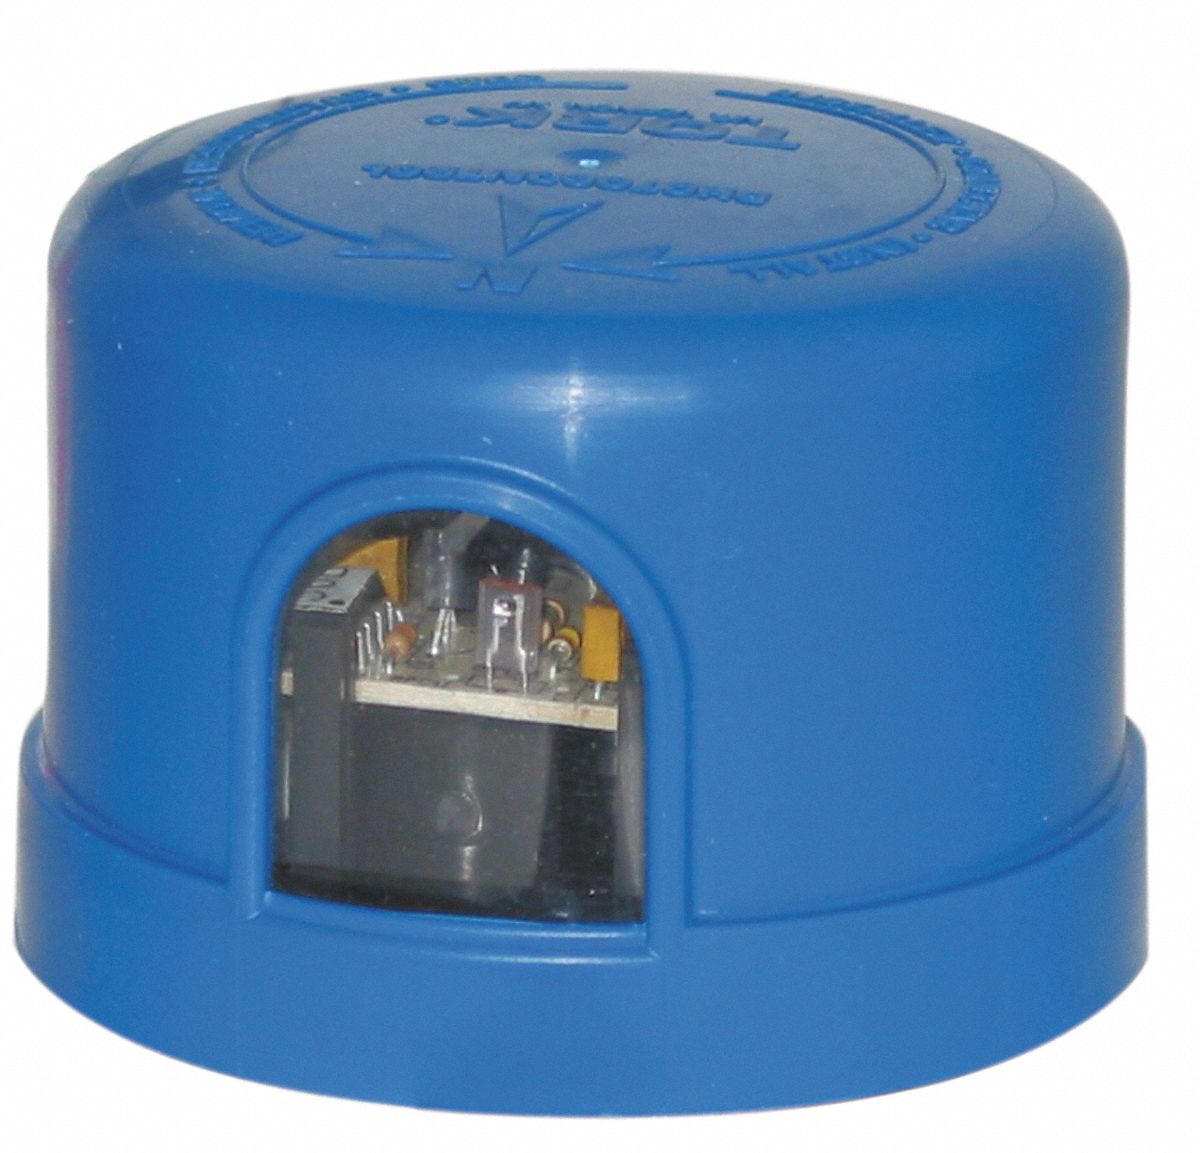 Wattage Turn-lock Mounting for sale online Tork Photocontrol 105 to 305vac Voltage 1000 Max 